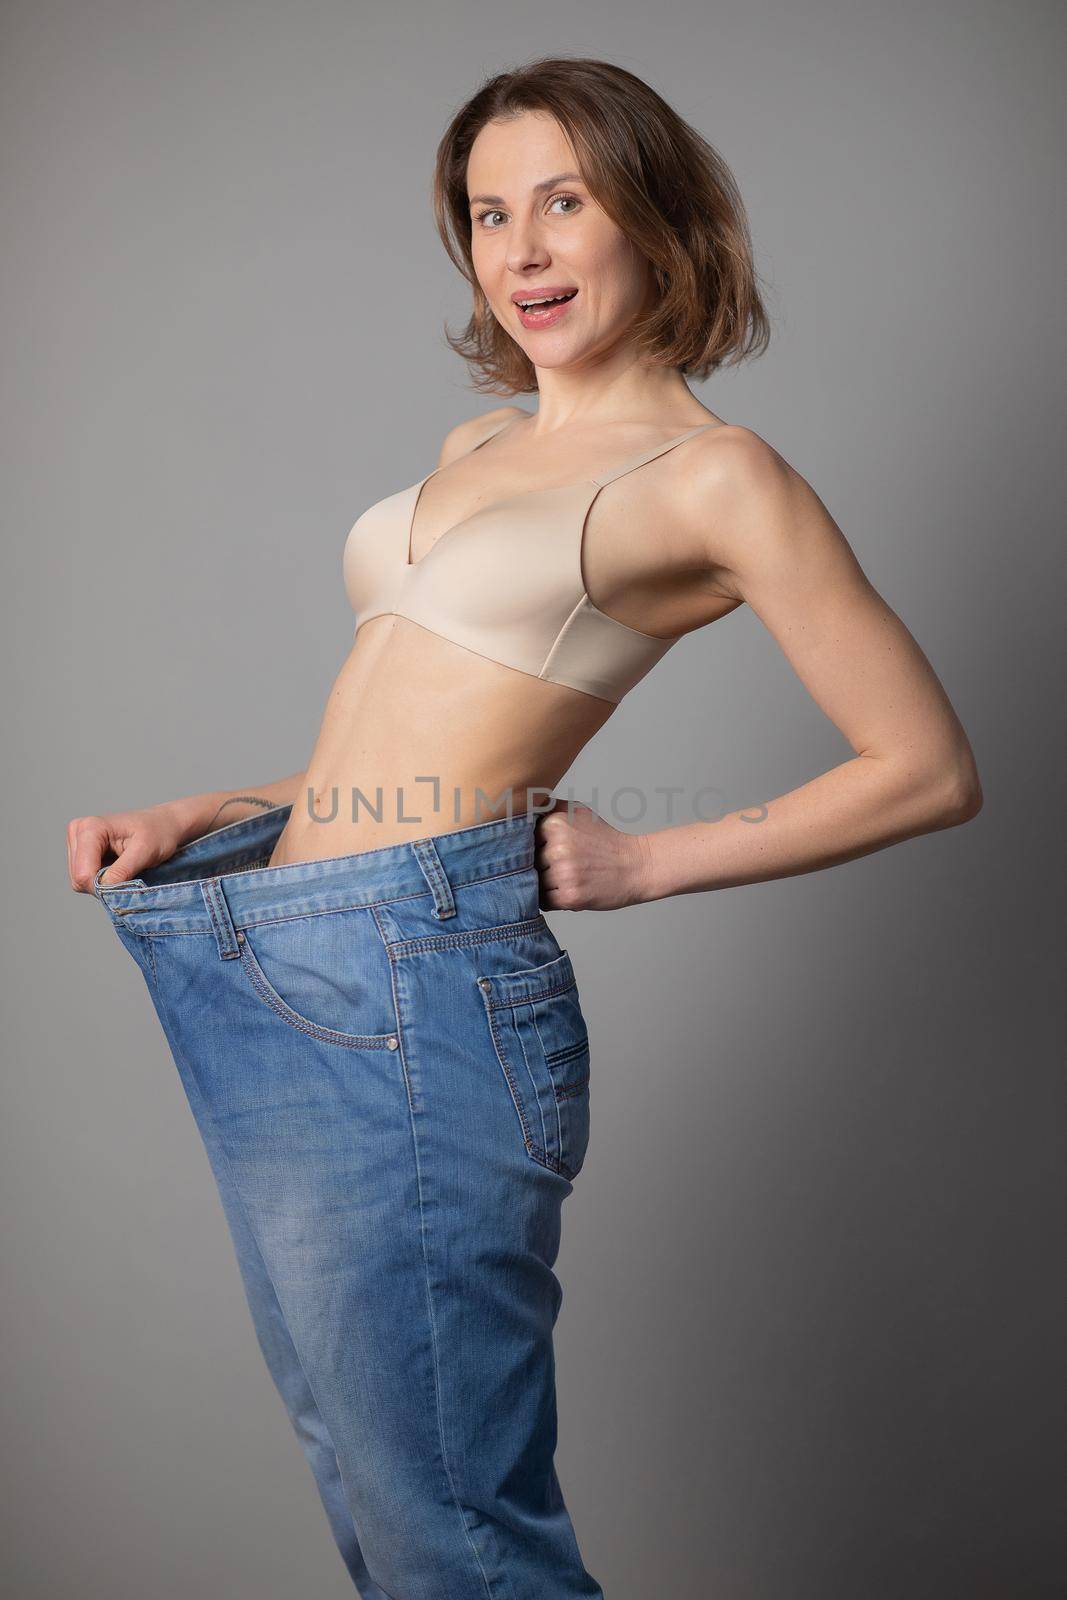 Woman Admiring the Result of Weight Loss While Wearing Old Jeans. Happy Female After Lost Weight. by uflypro